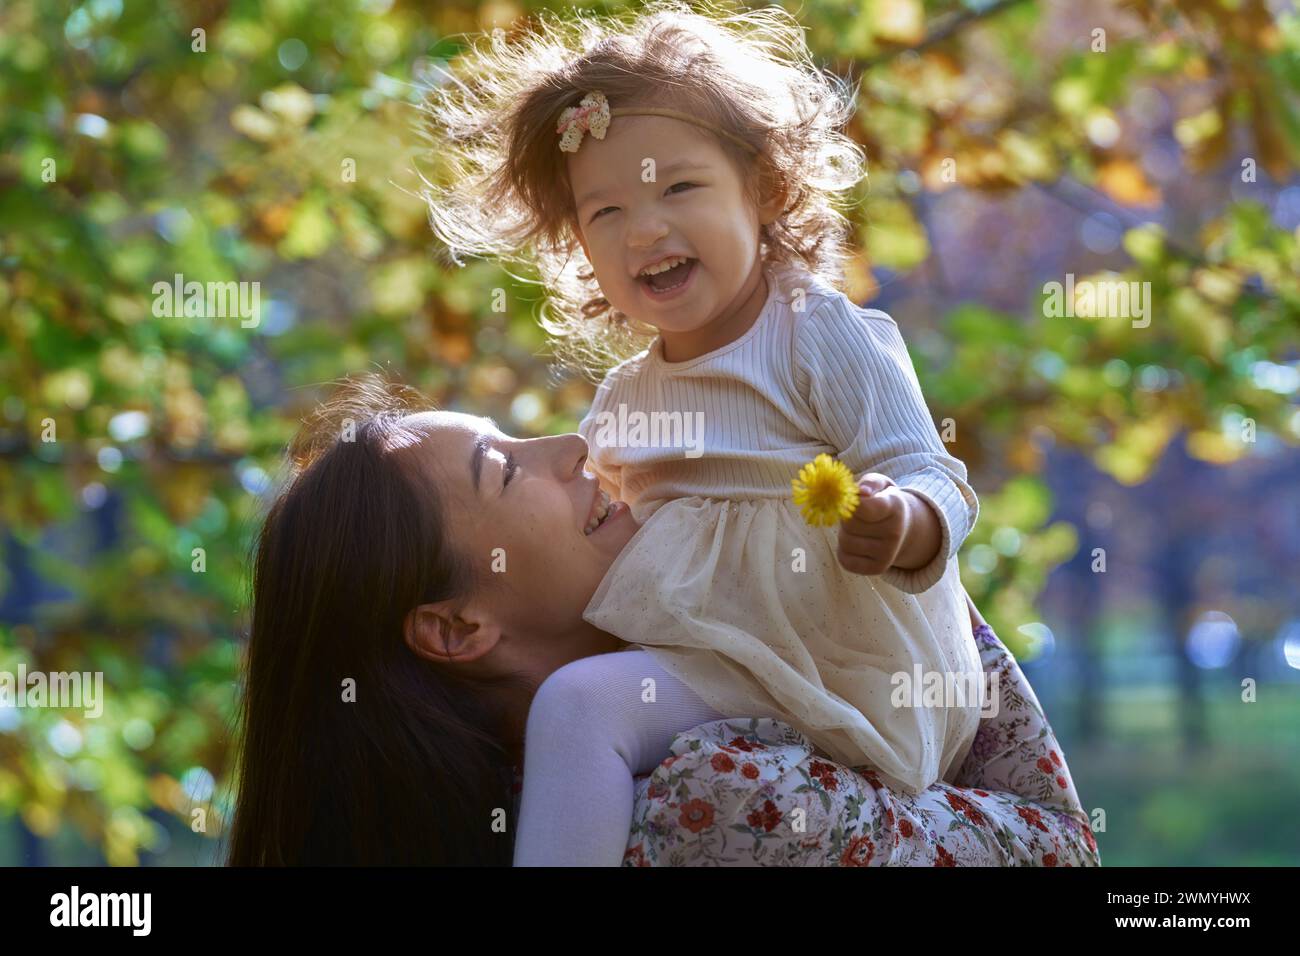 A heartwarming scene of an ethnic mother lifting her smiling daughter in a sunny Californian park, surrounded by the beauty of nature. Stock Photo